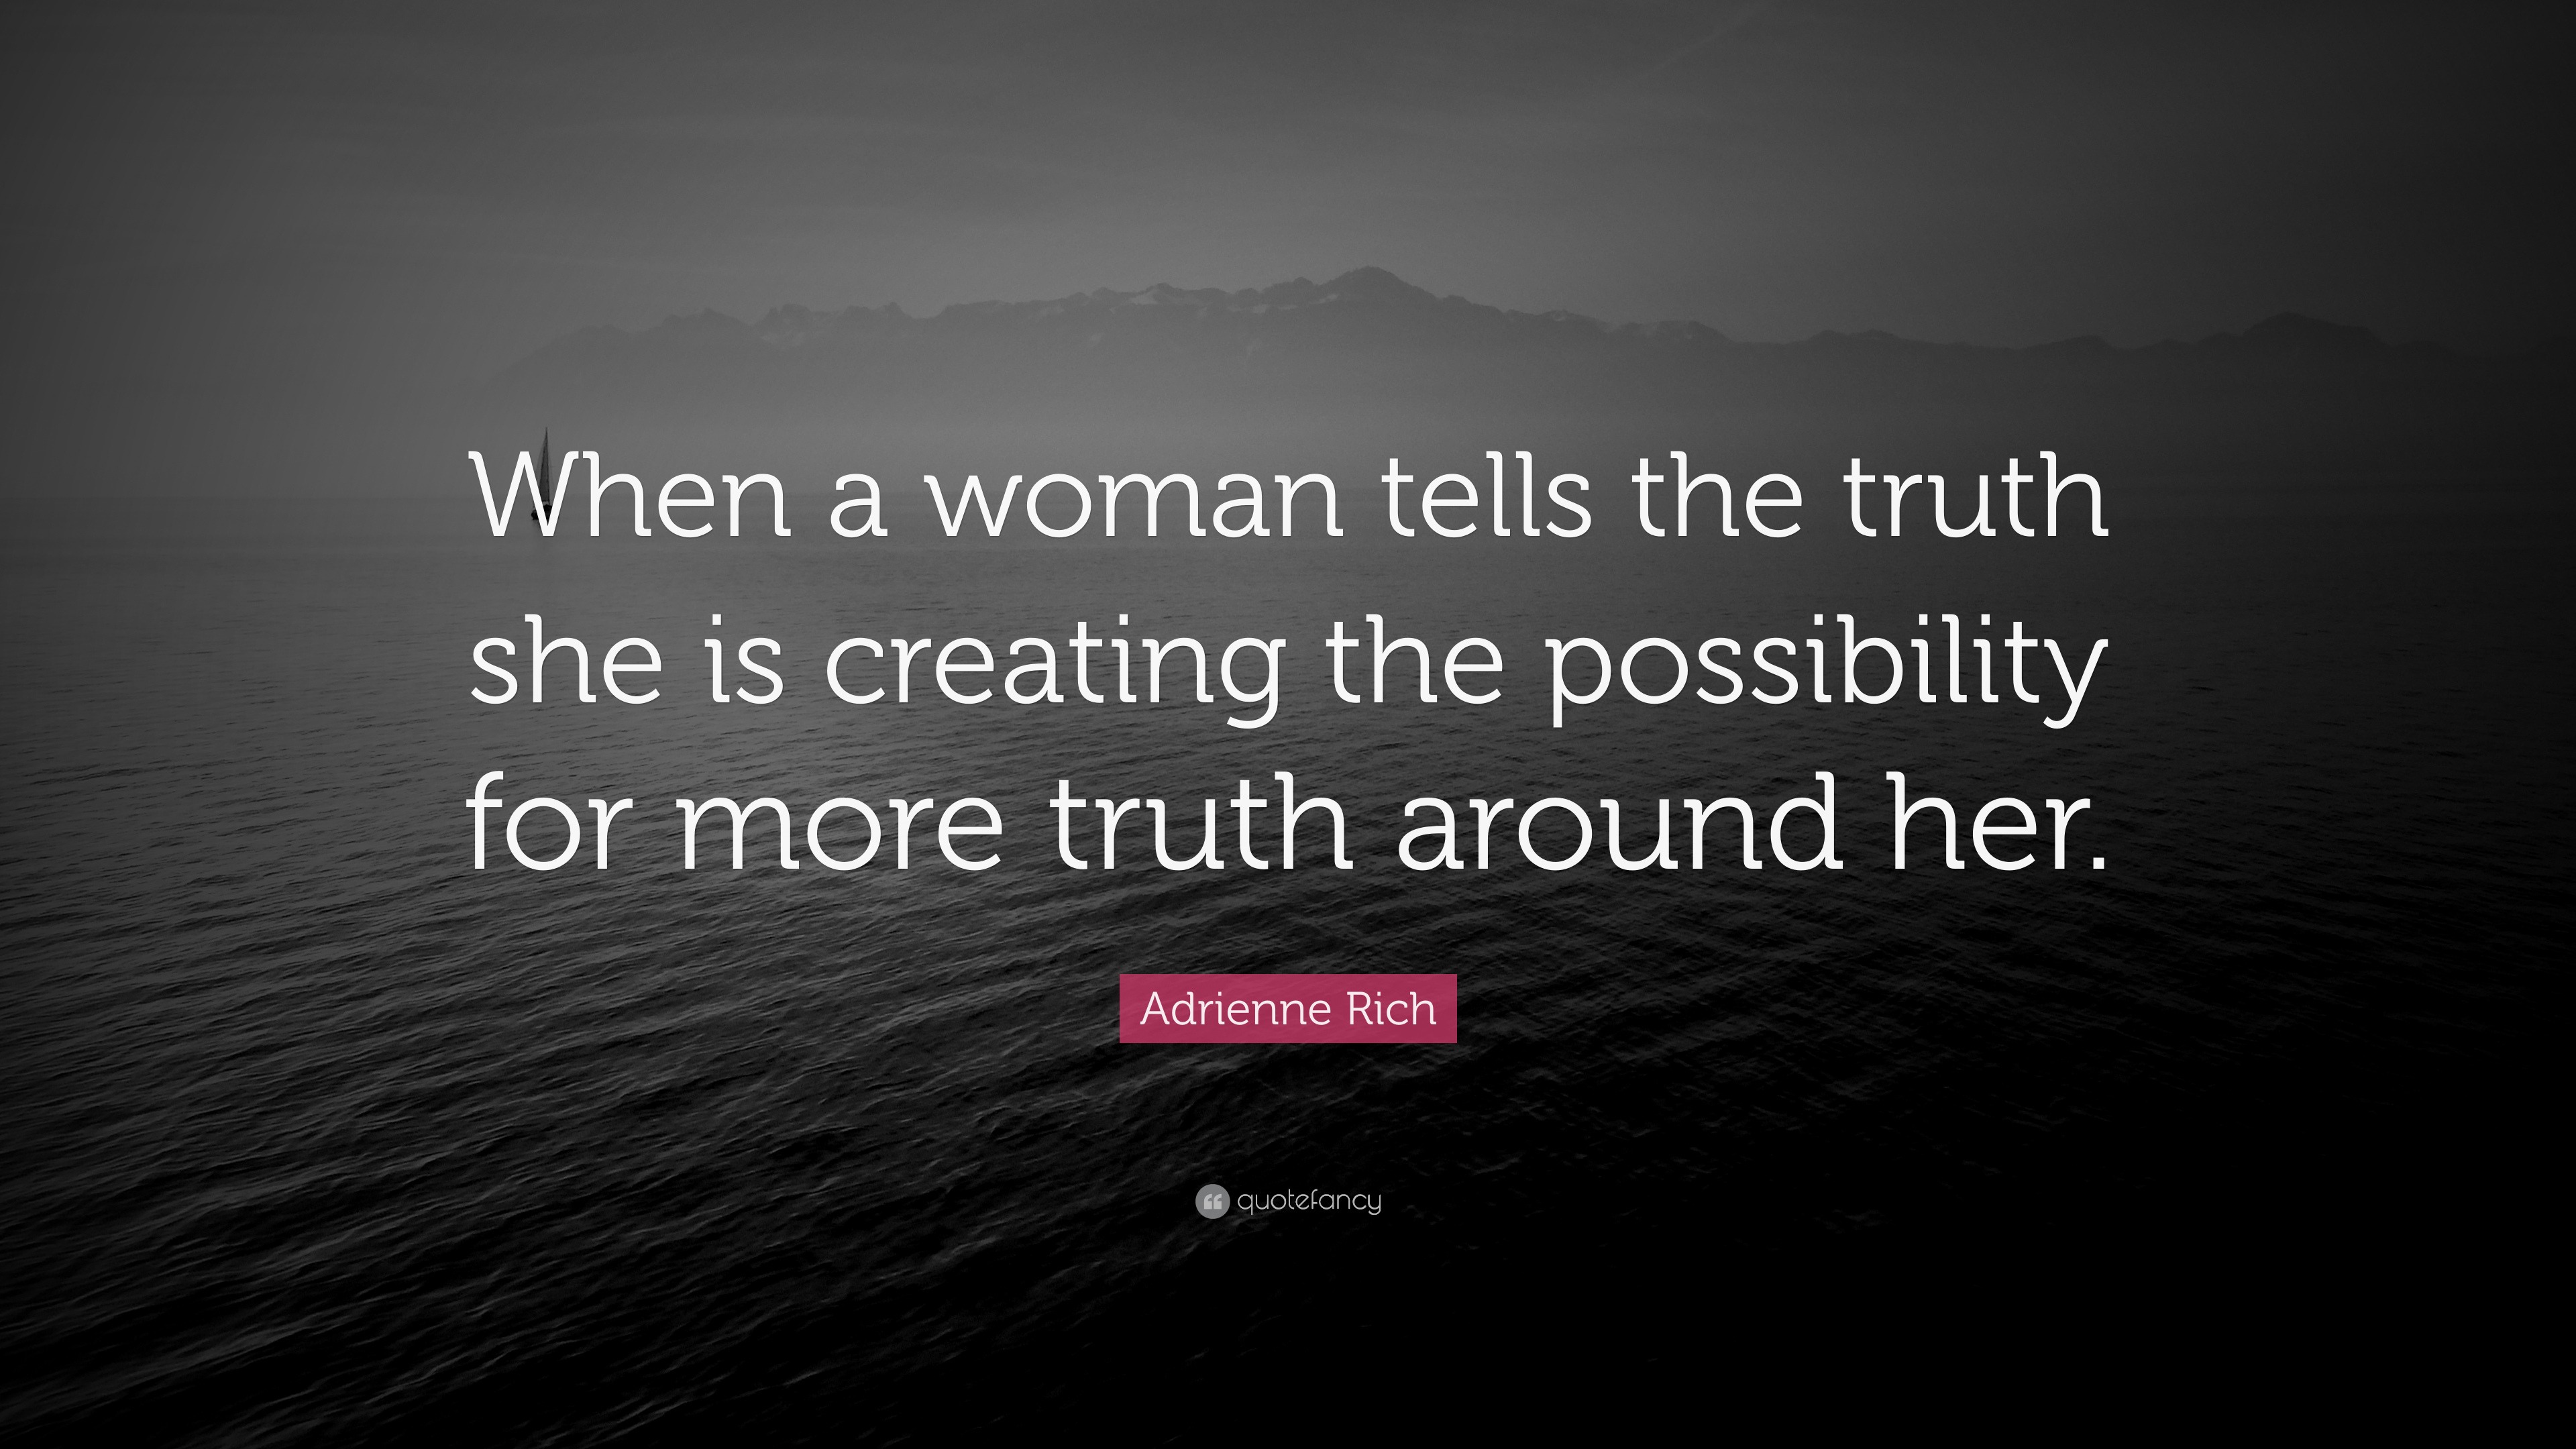 Adrienne Rich Quote: “When a woman tells the truth she is creating the ...